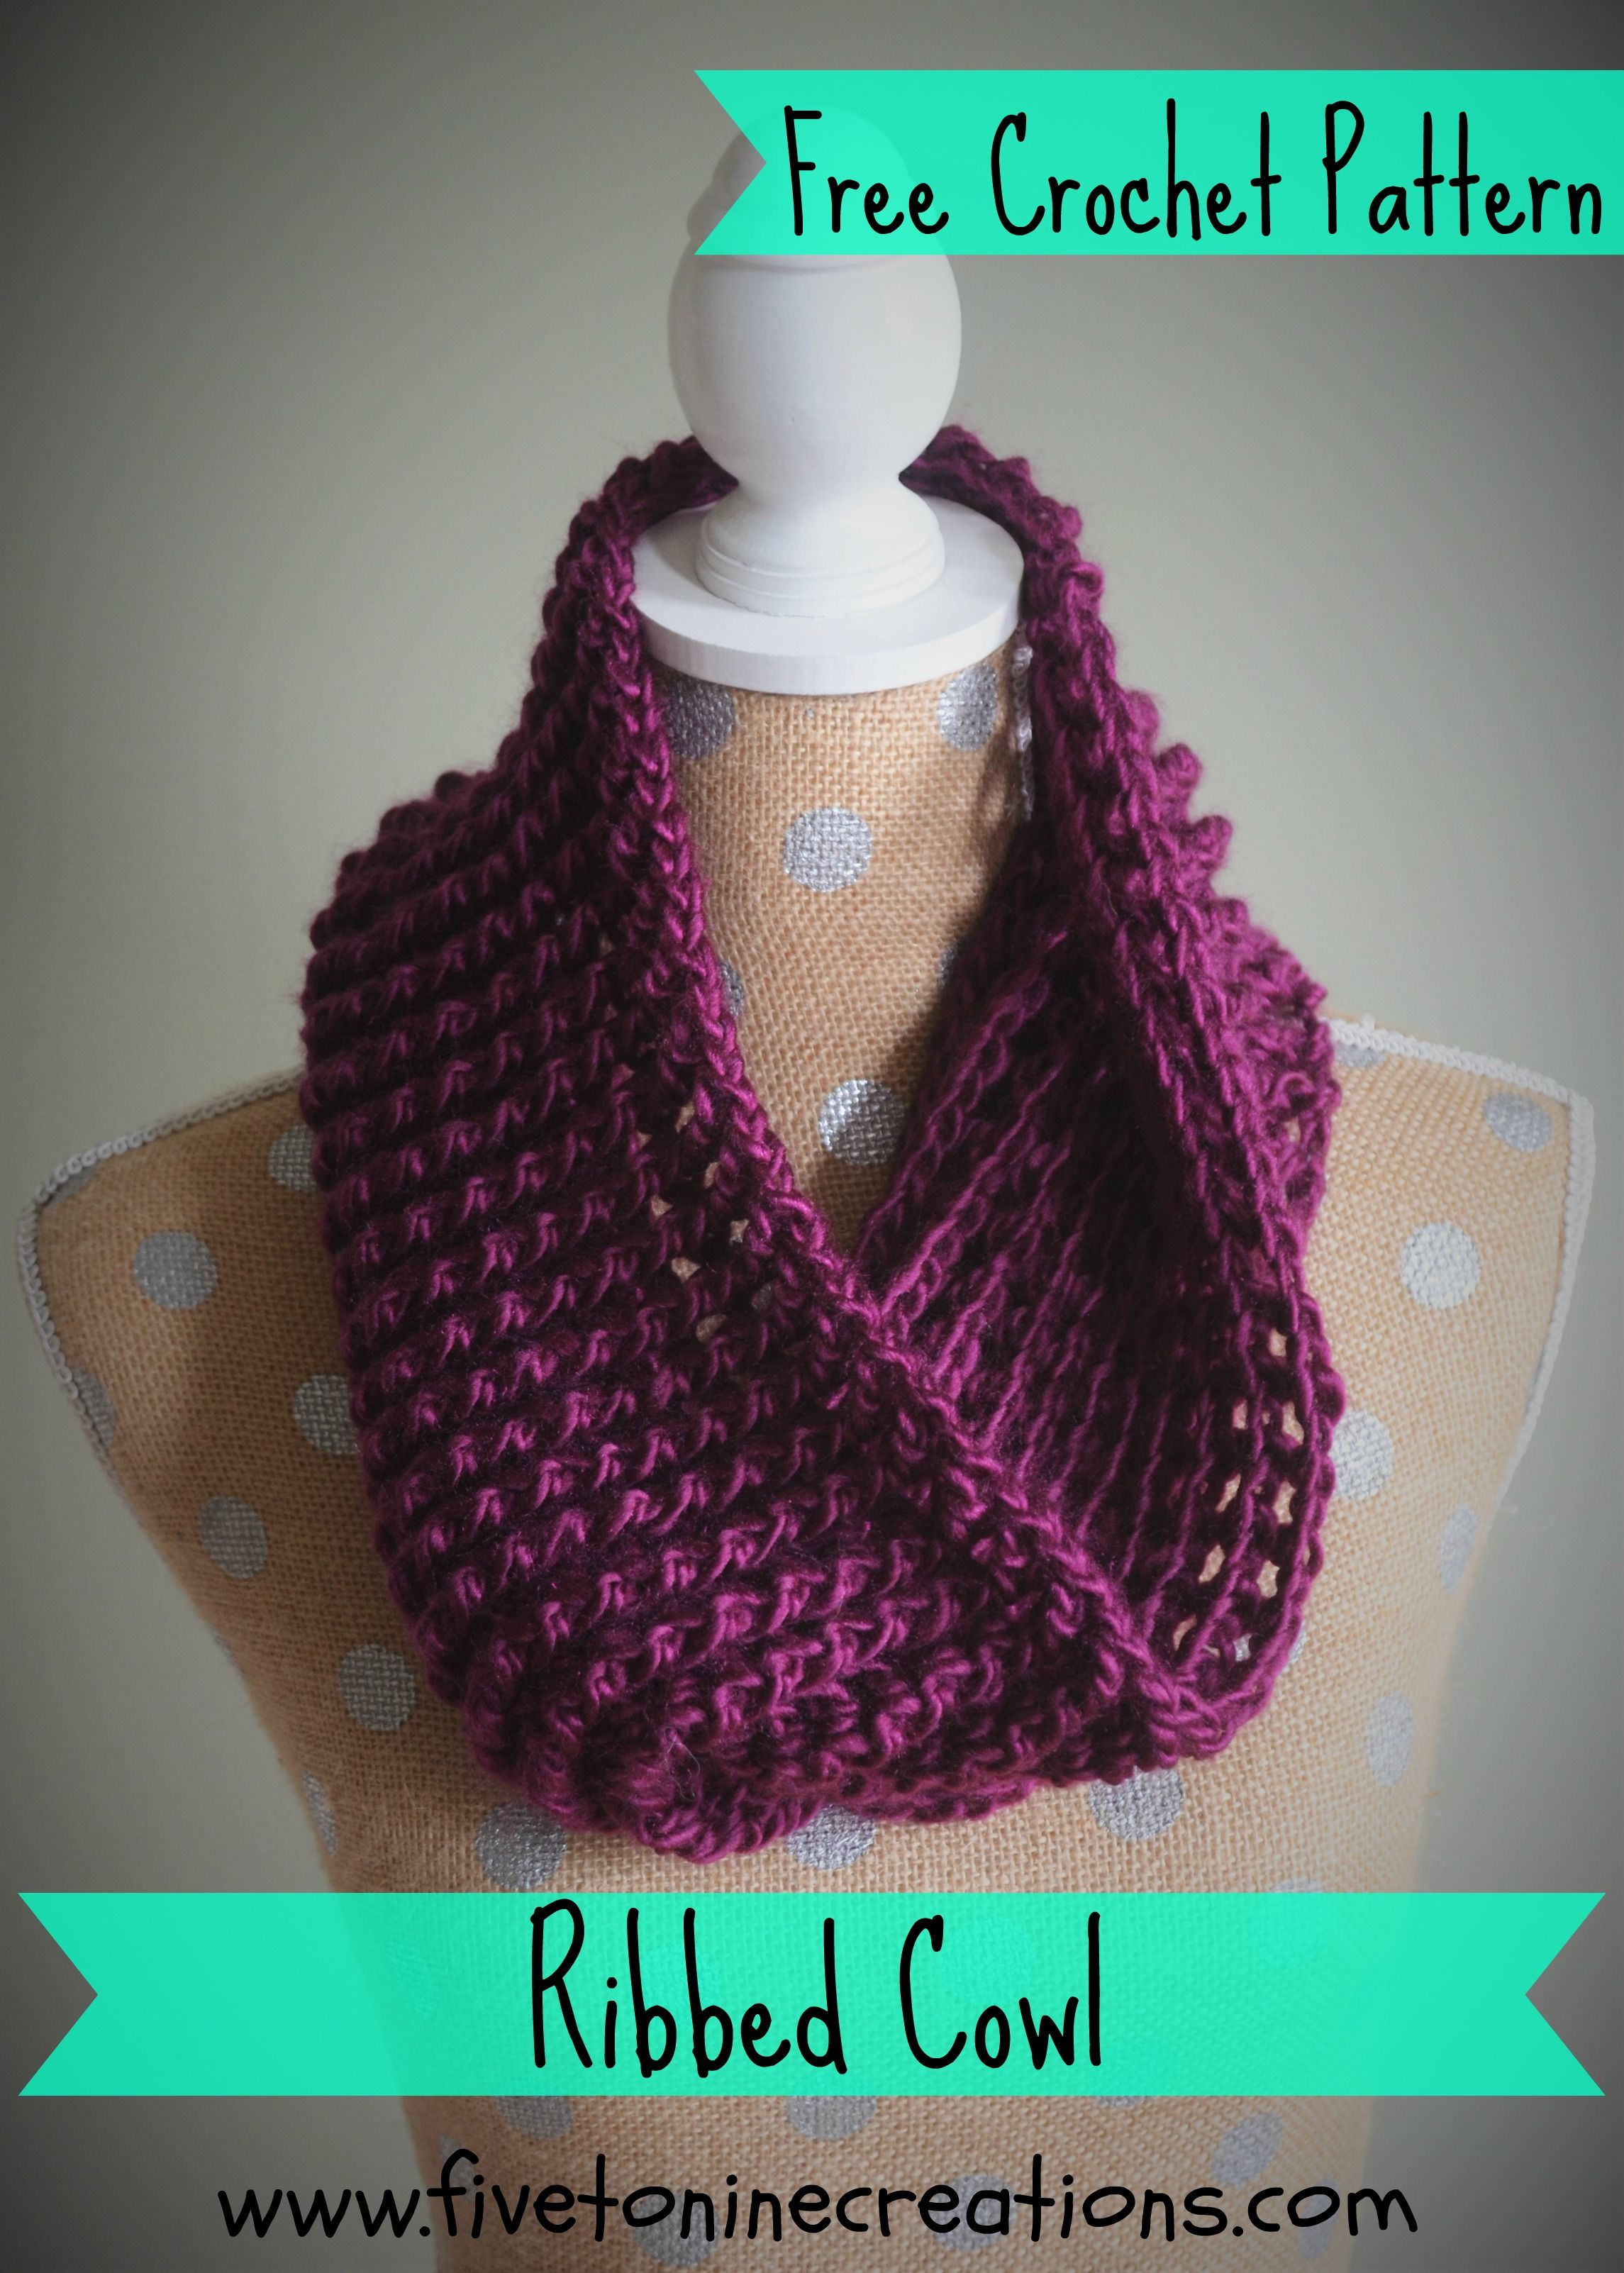 Free Crochet Cowl Patterns Free Crochet Pattern Great For Beginners Cowl Is Made With Lions